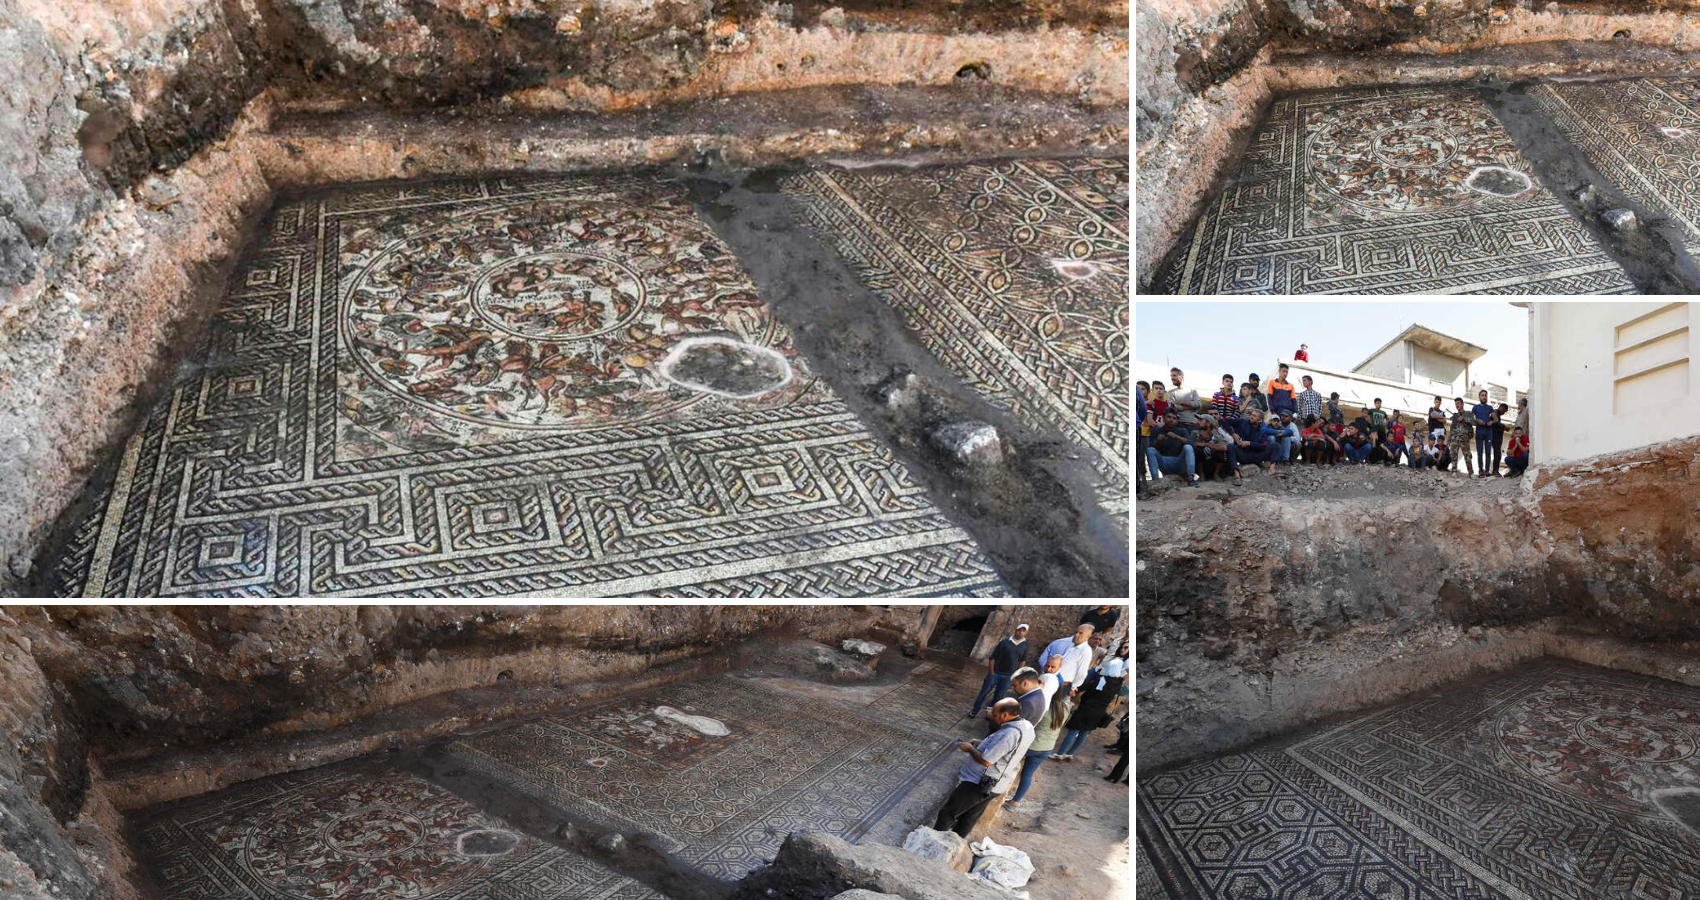 Sensational find in Syria: researchers find mosaic from Roman times (video)